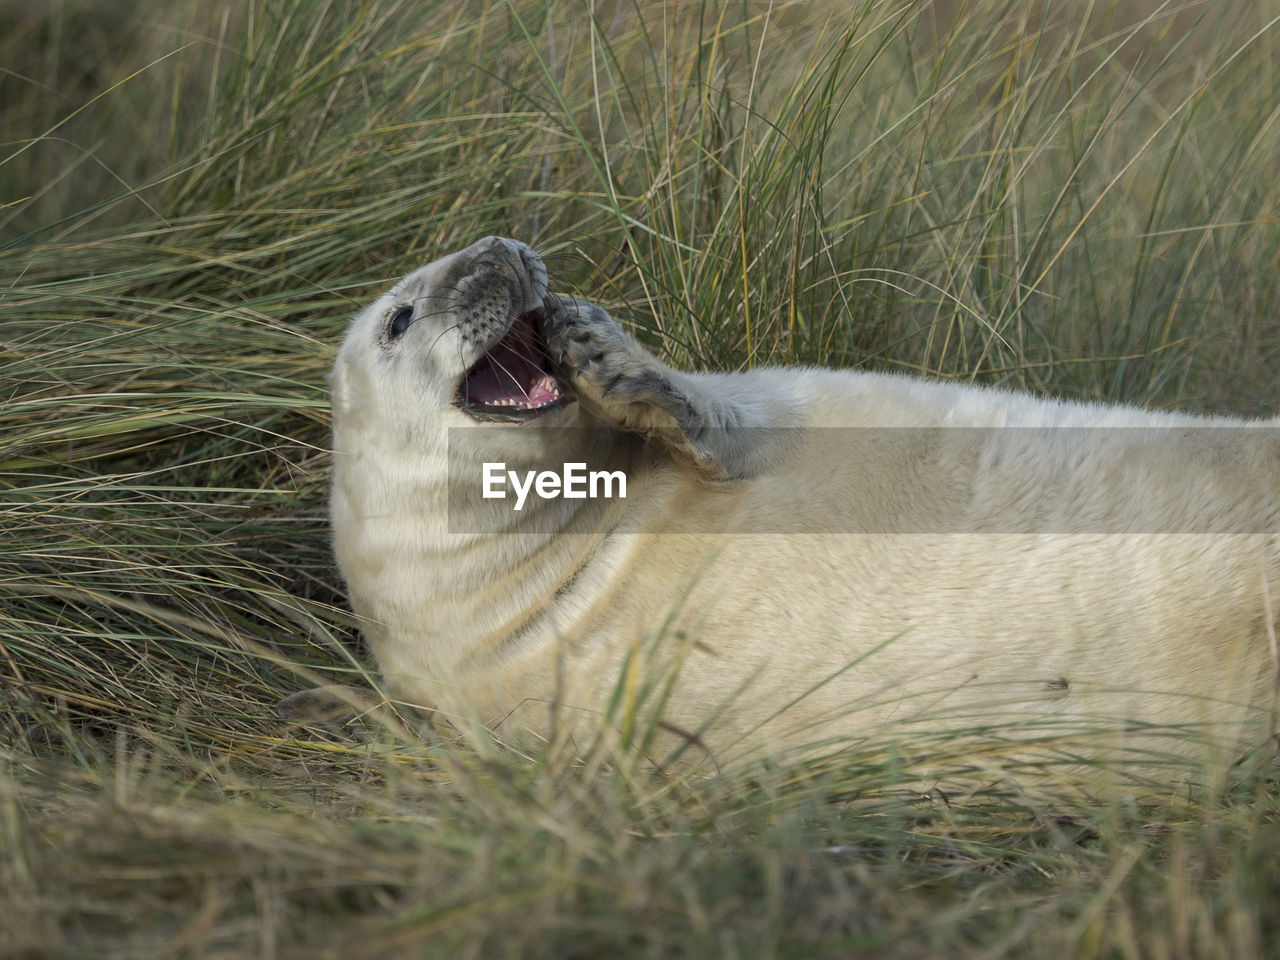 Close-up of grey seal on grassy field